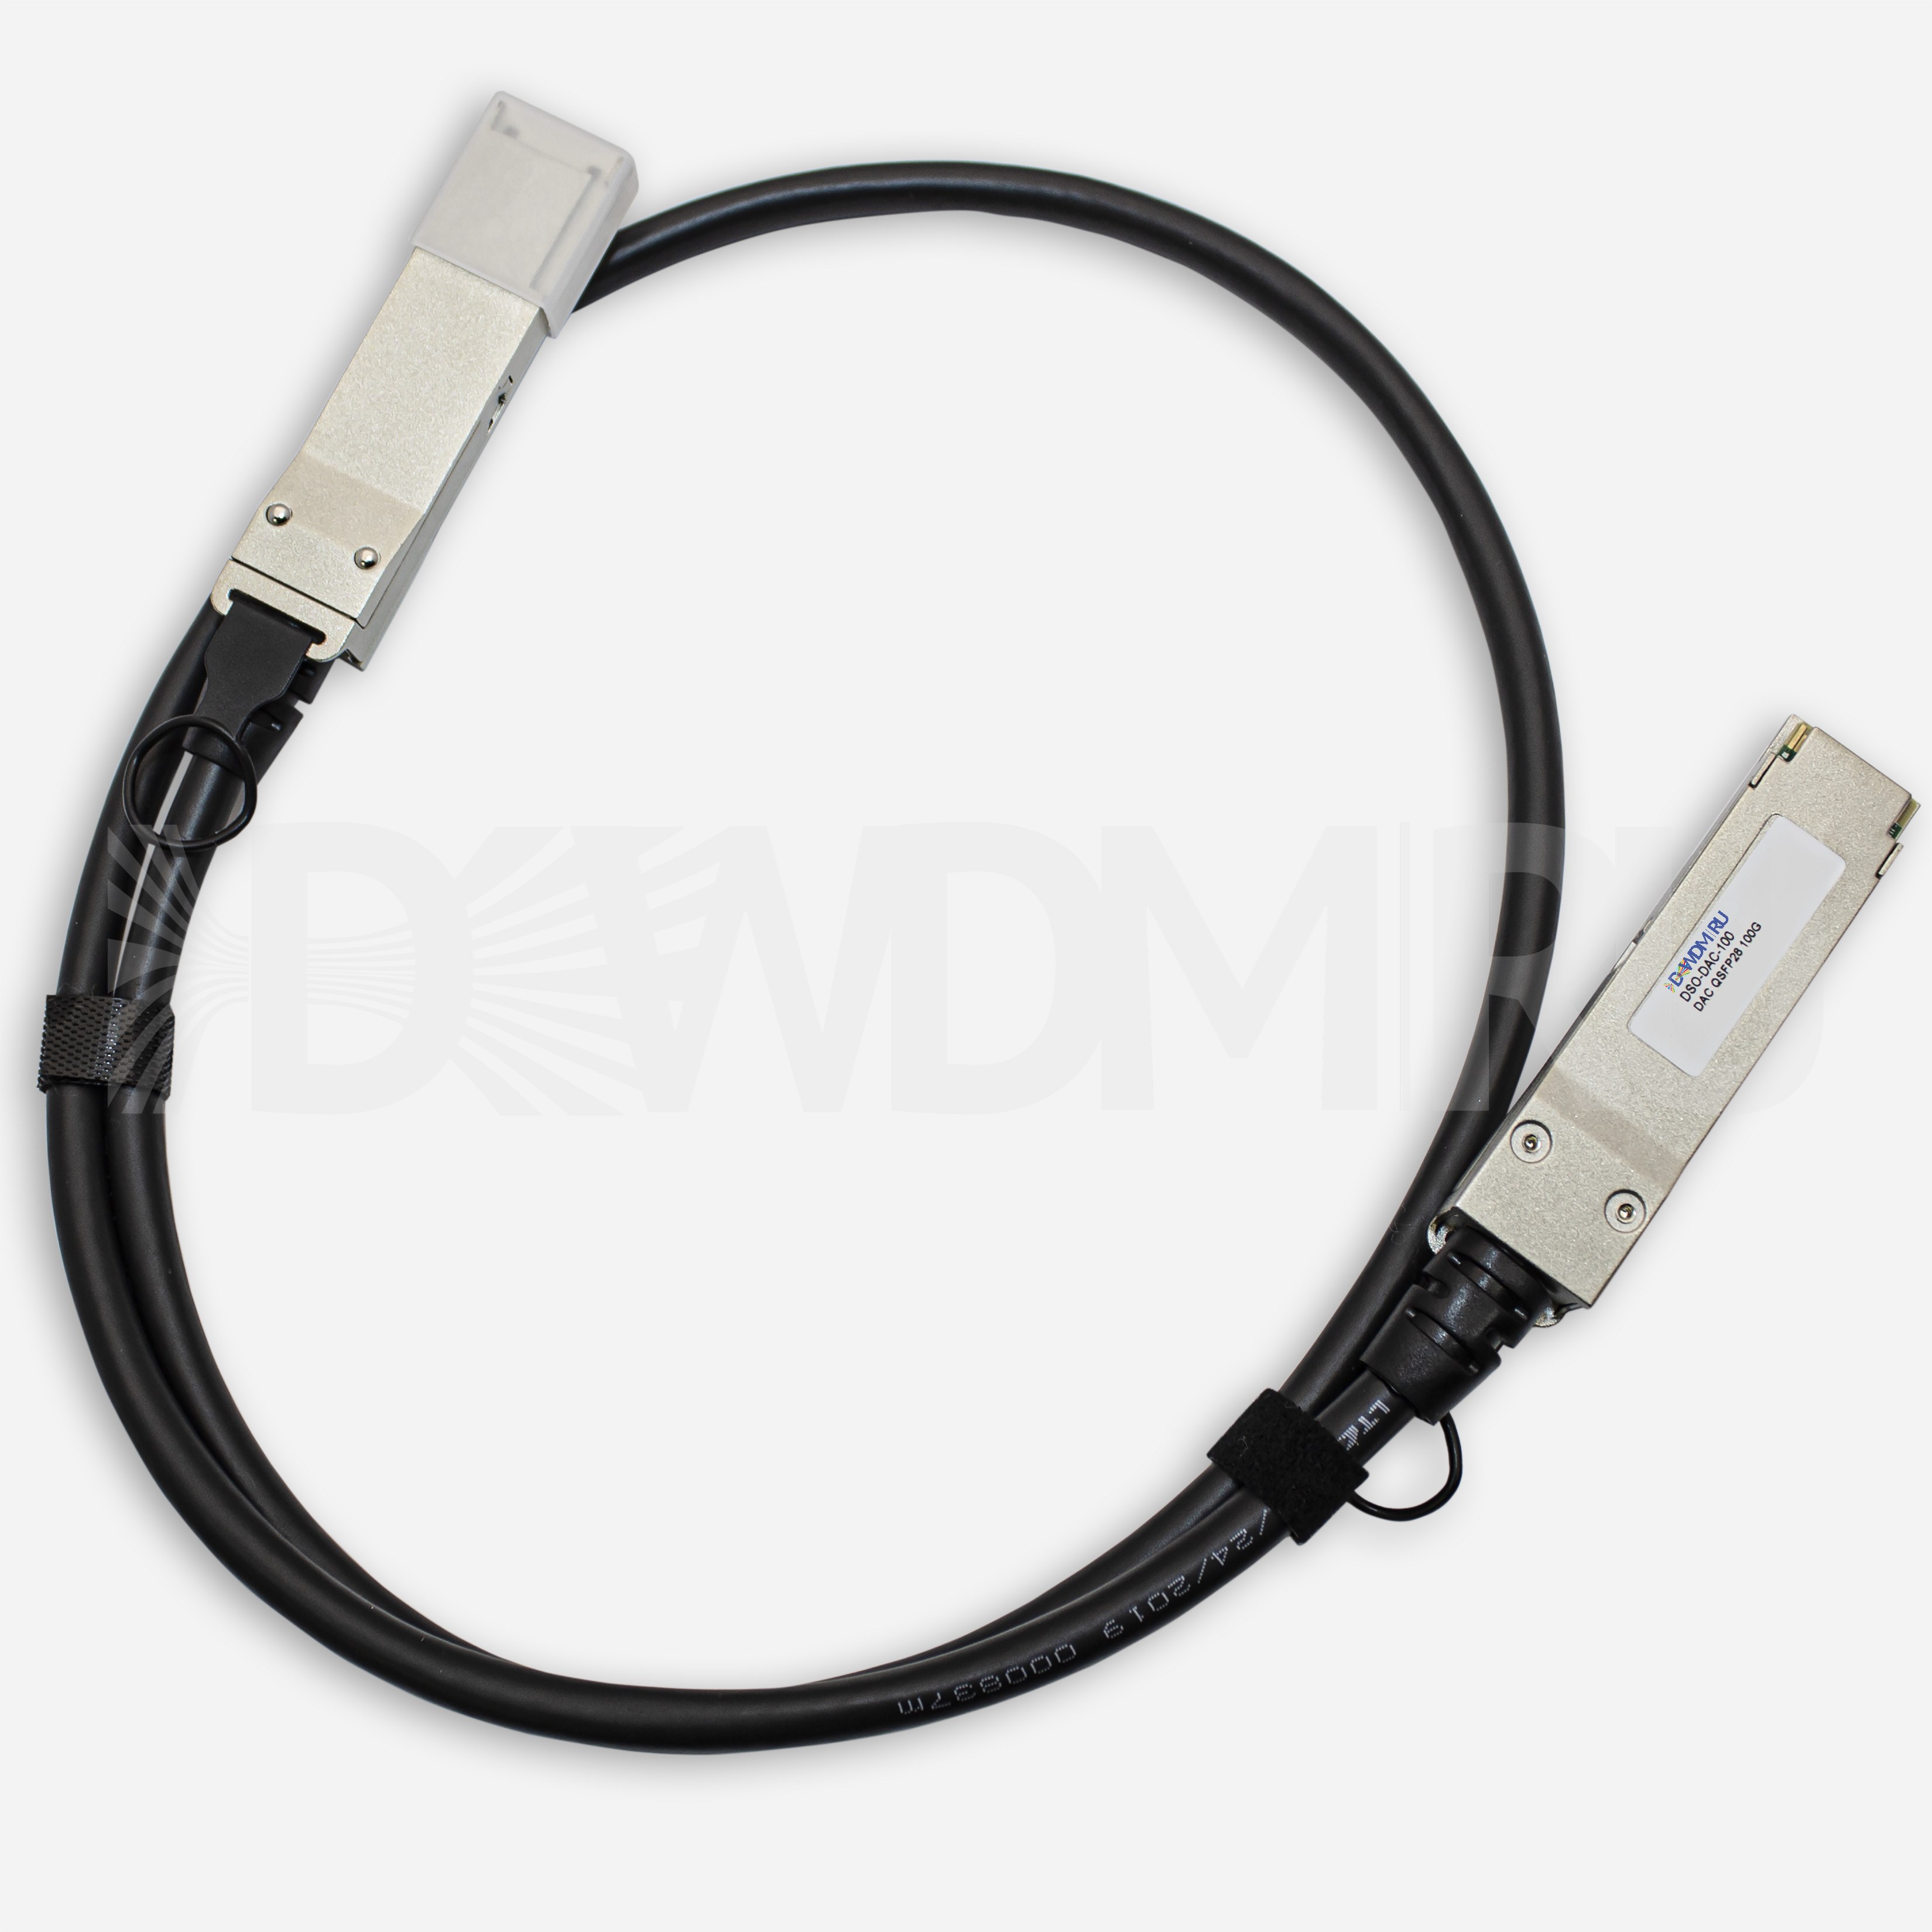 Кабель Direct Attached, QSFP28, 100 Гб/с, 5 м - ДВДМ.РУ (DSO-DAC-100-5)